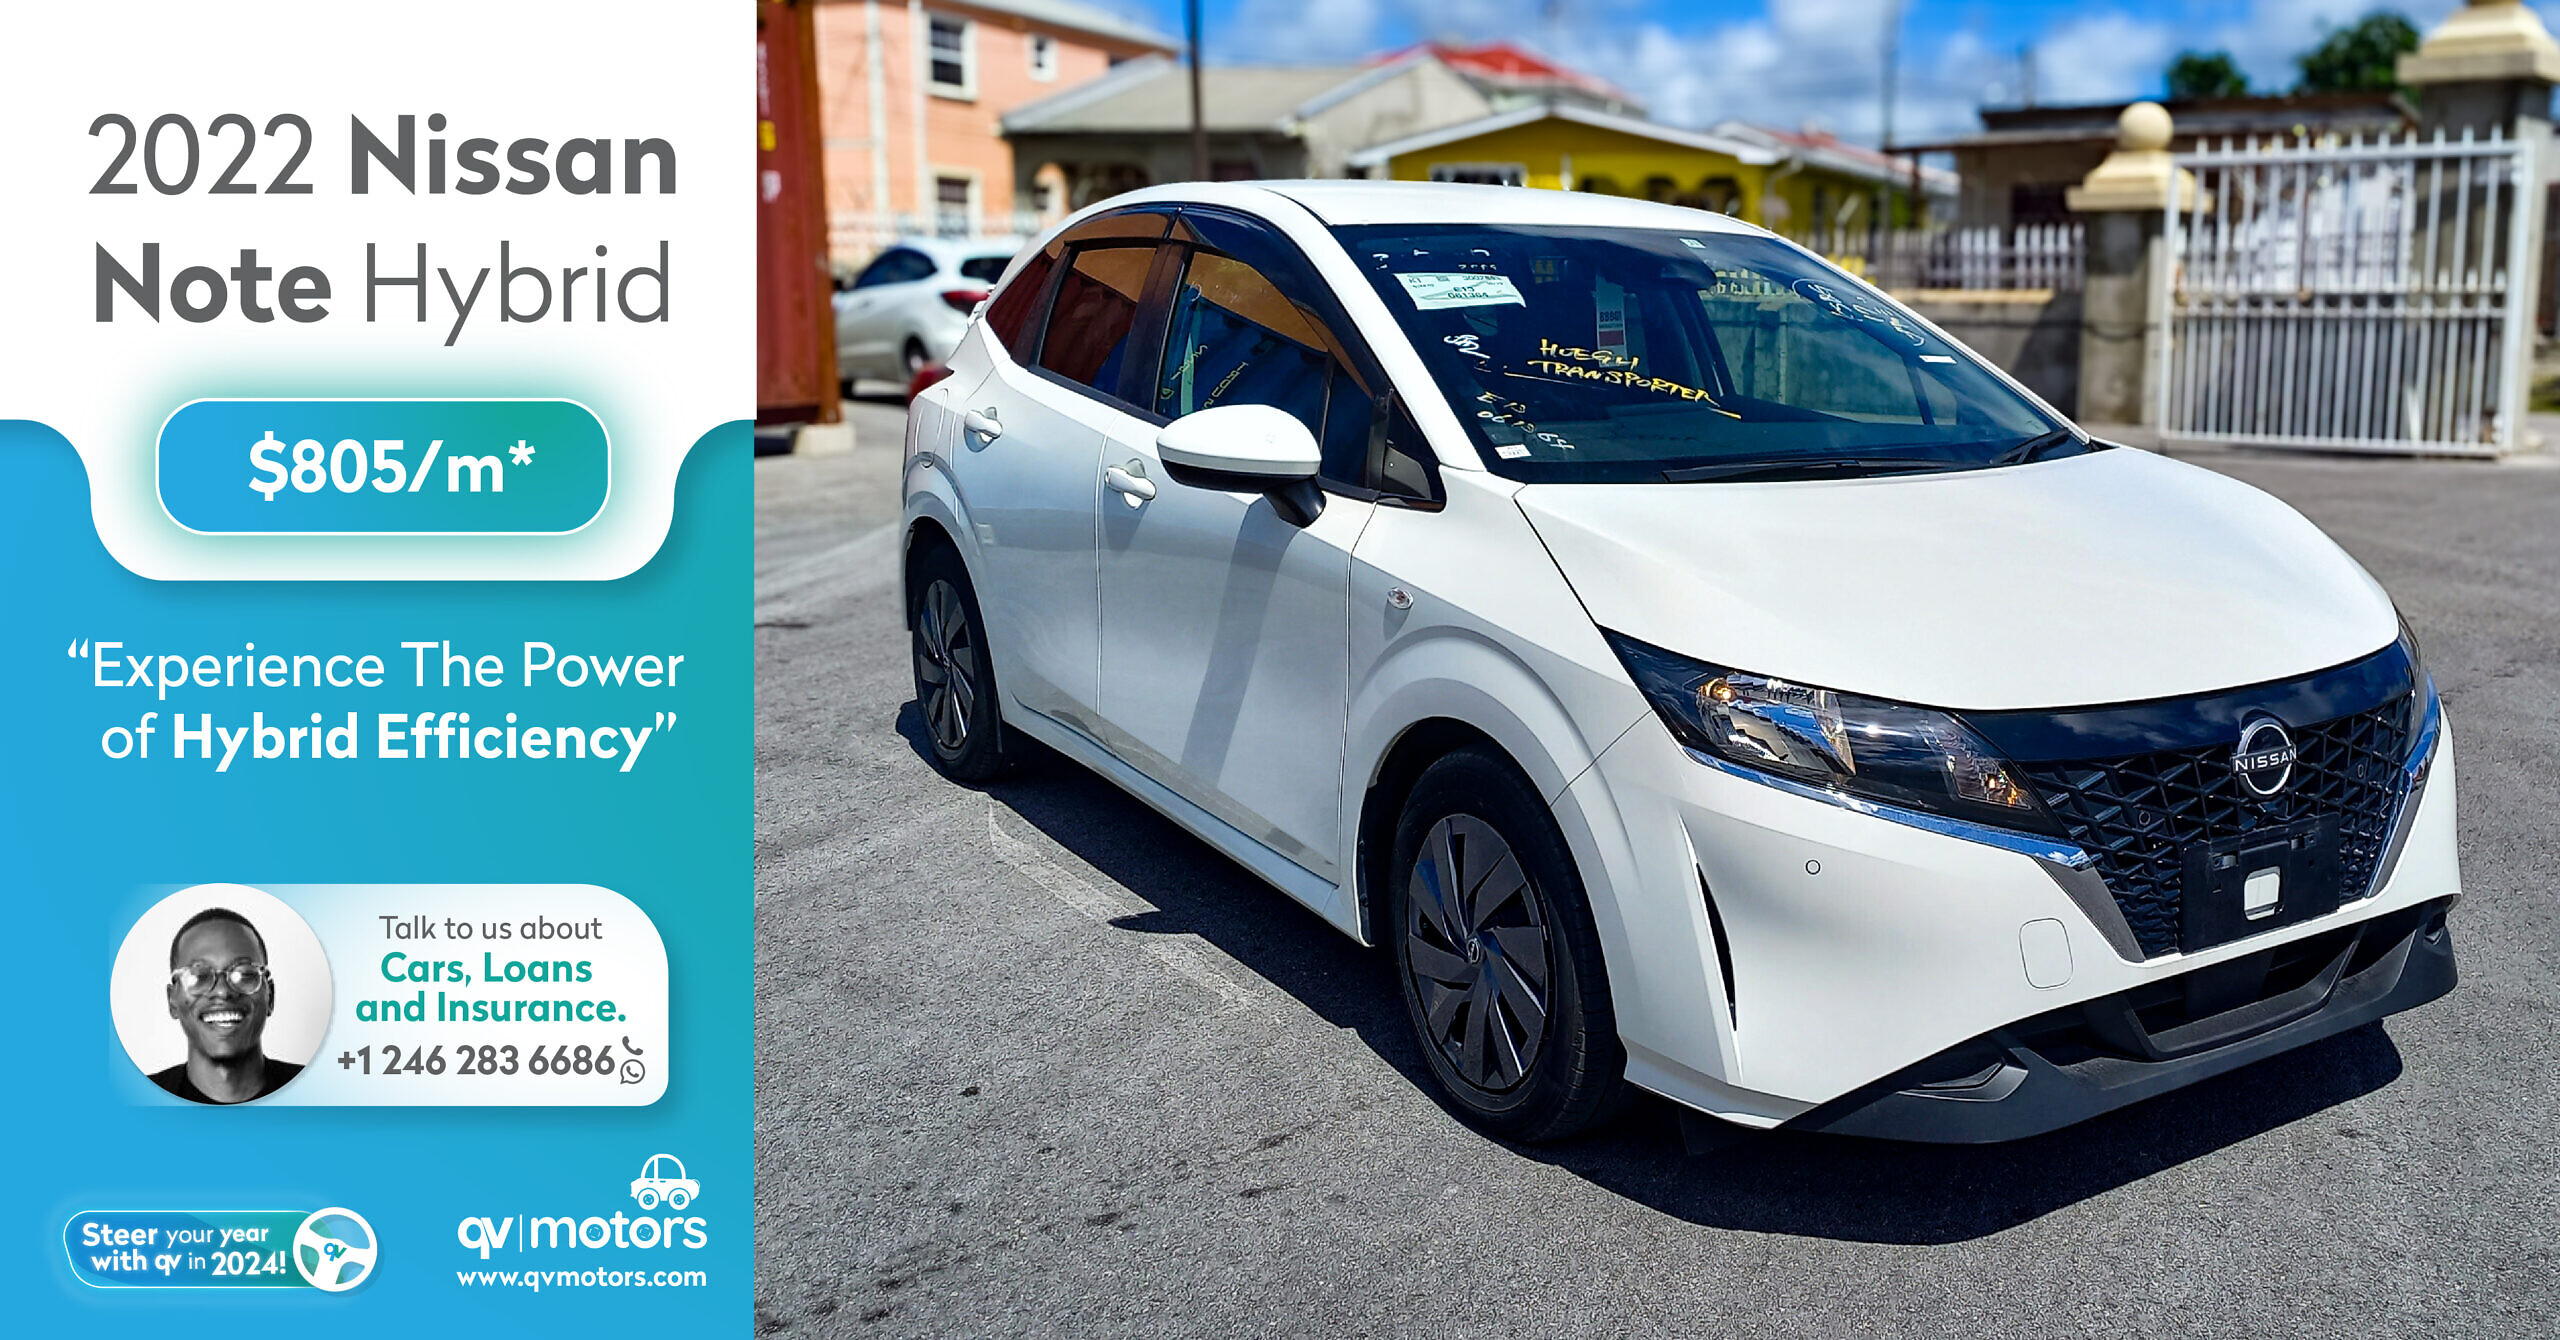 2022 Nissan Note Hybrid – Save Up to 50% on Gas!